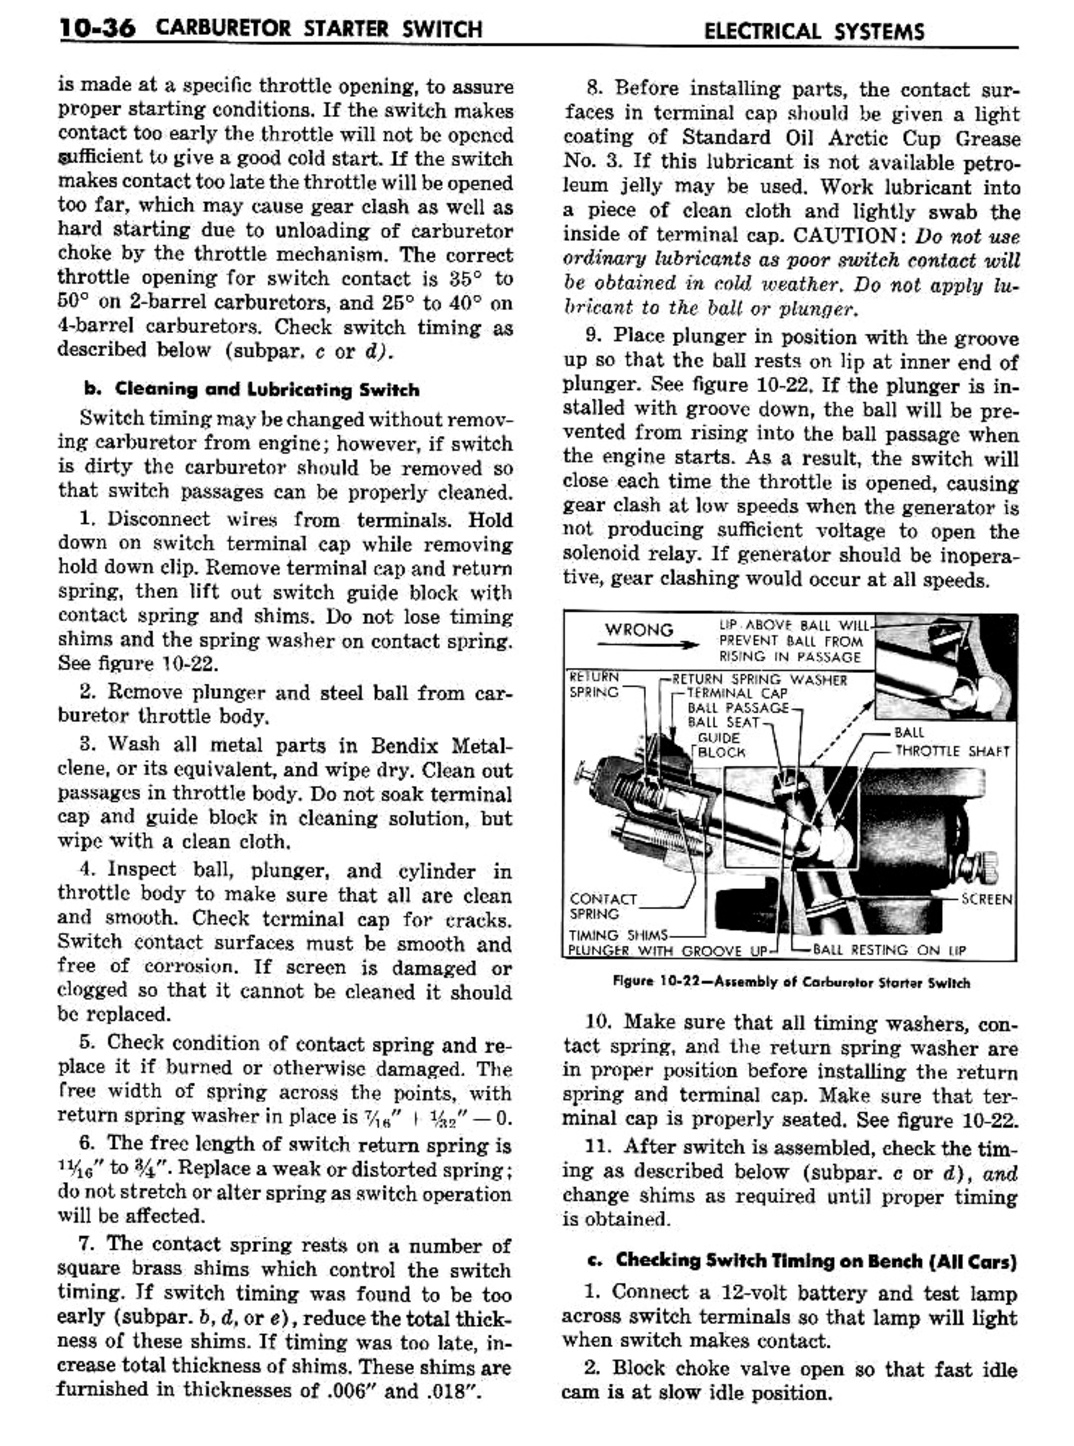 n_11 1960 Buick Shop Manual - Electrical Systems-036-036.jpg